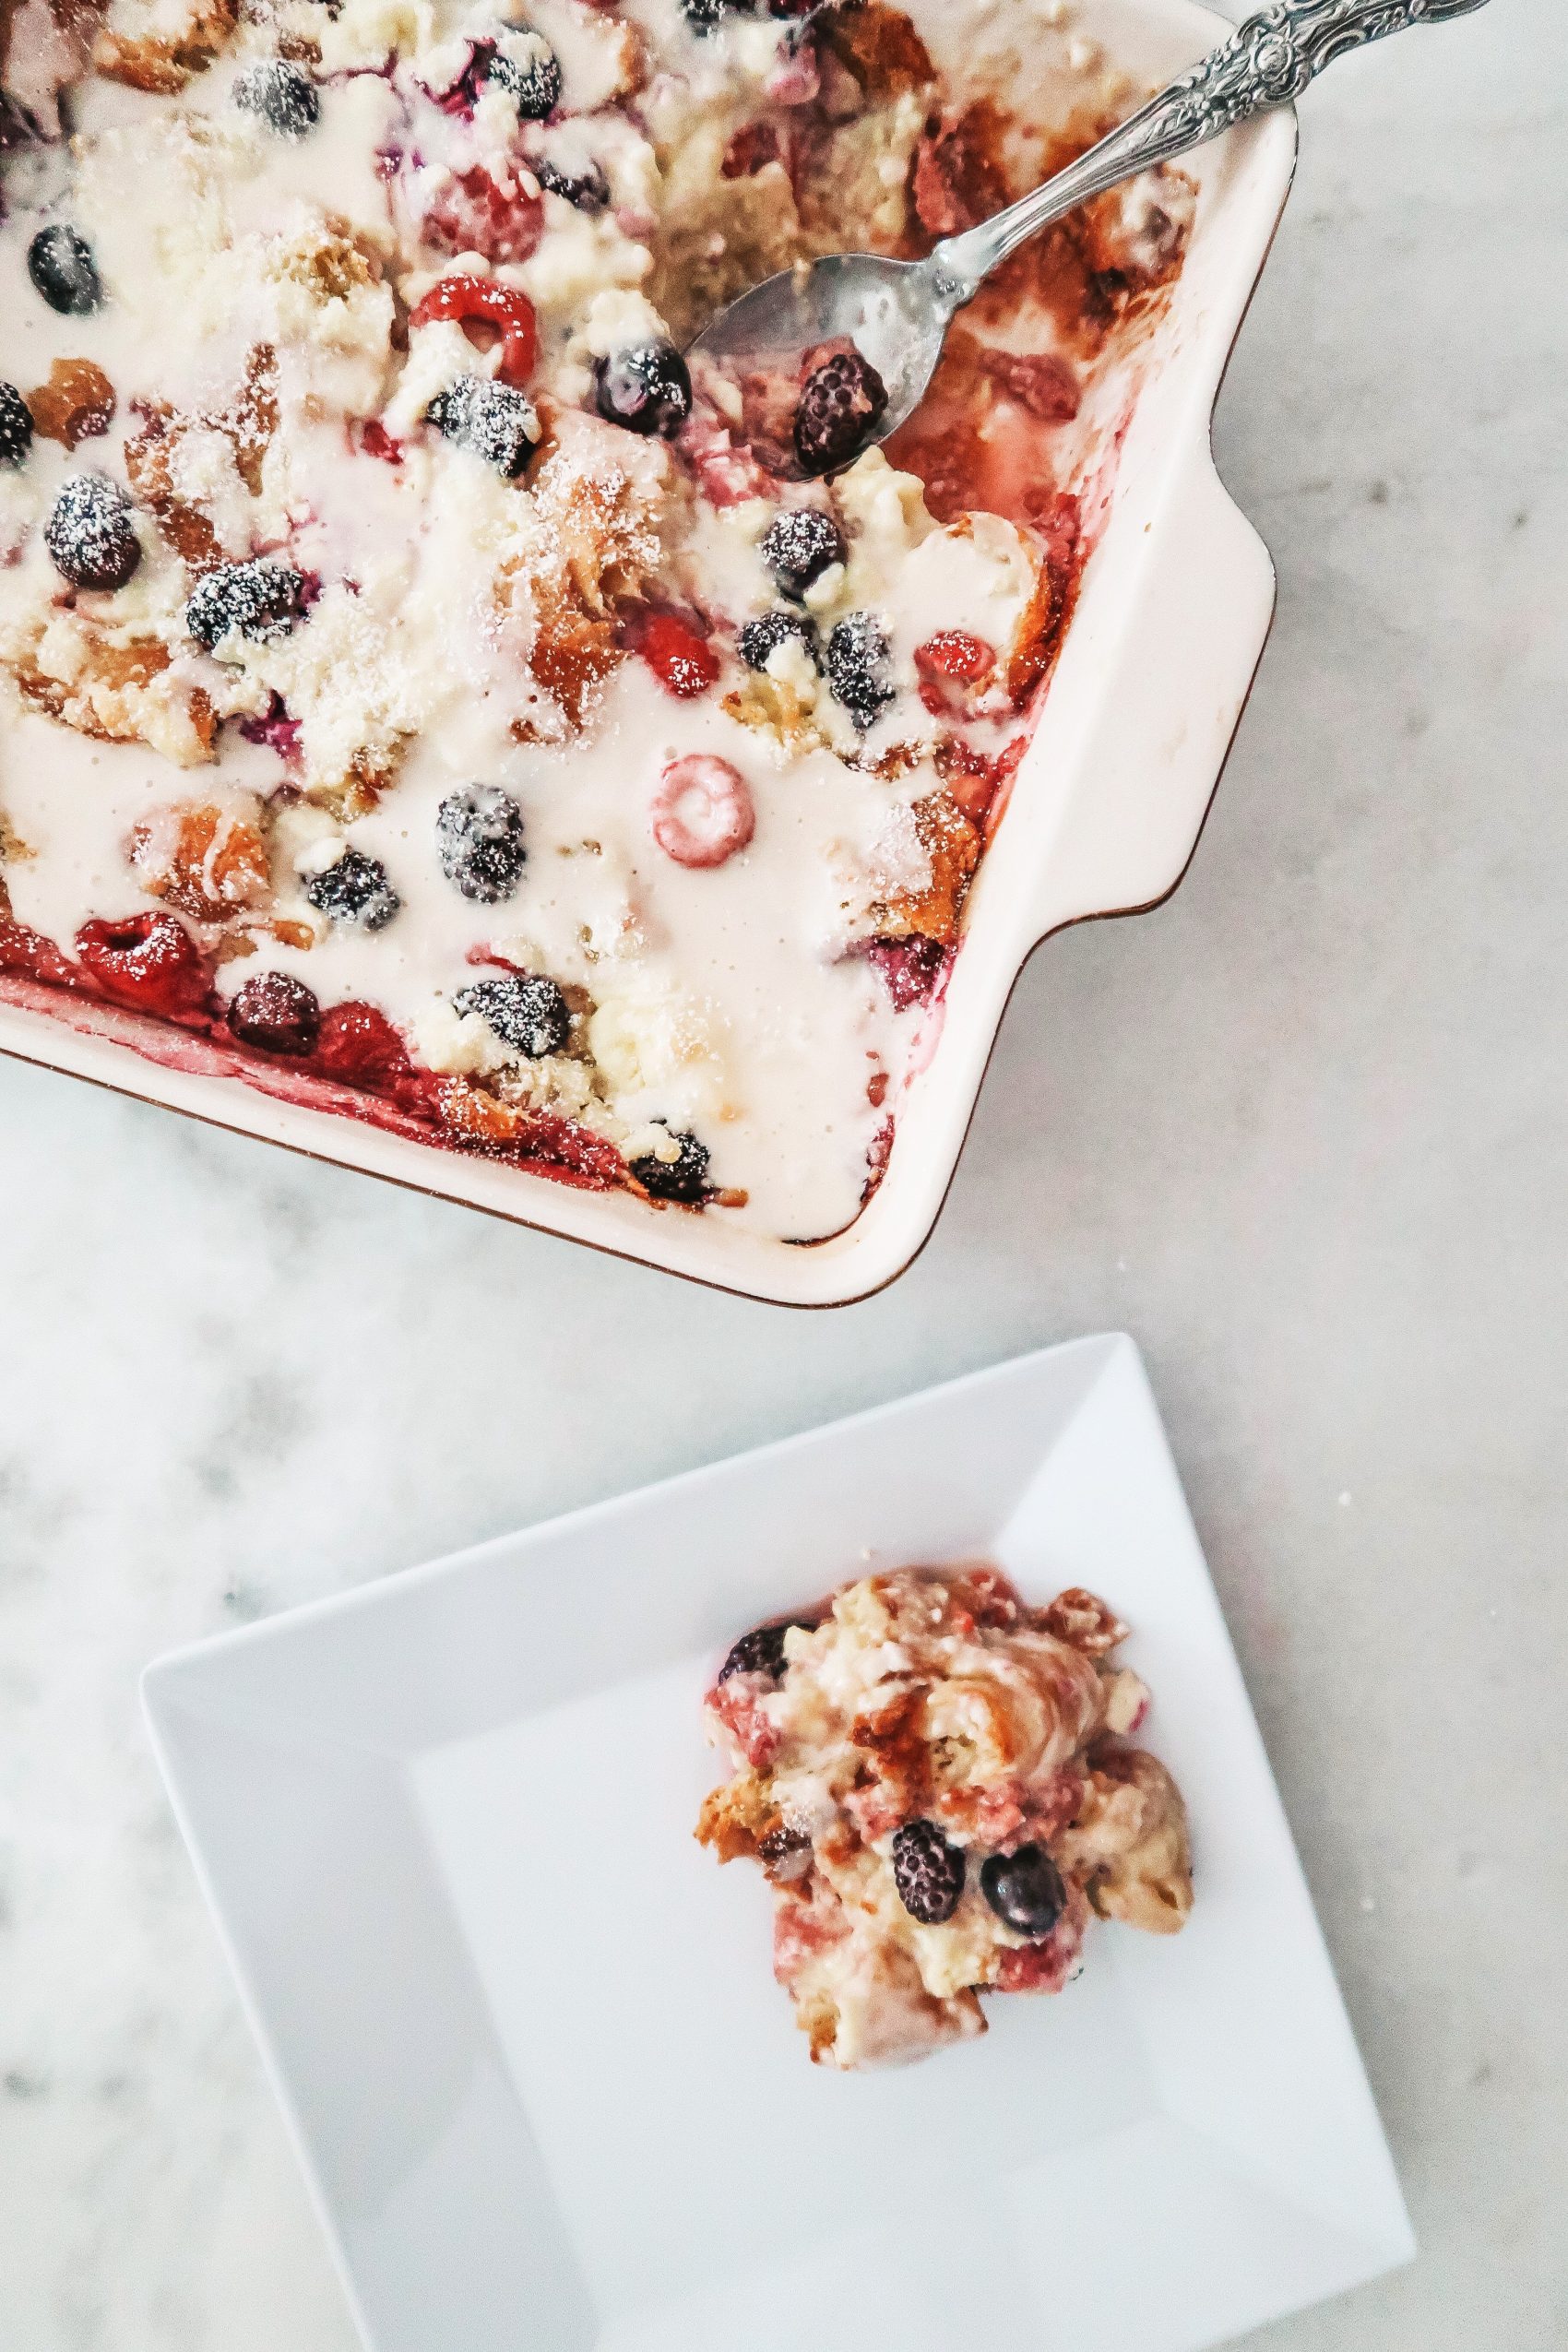 a berry bake for breakfast